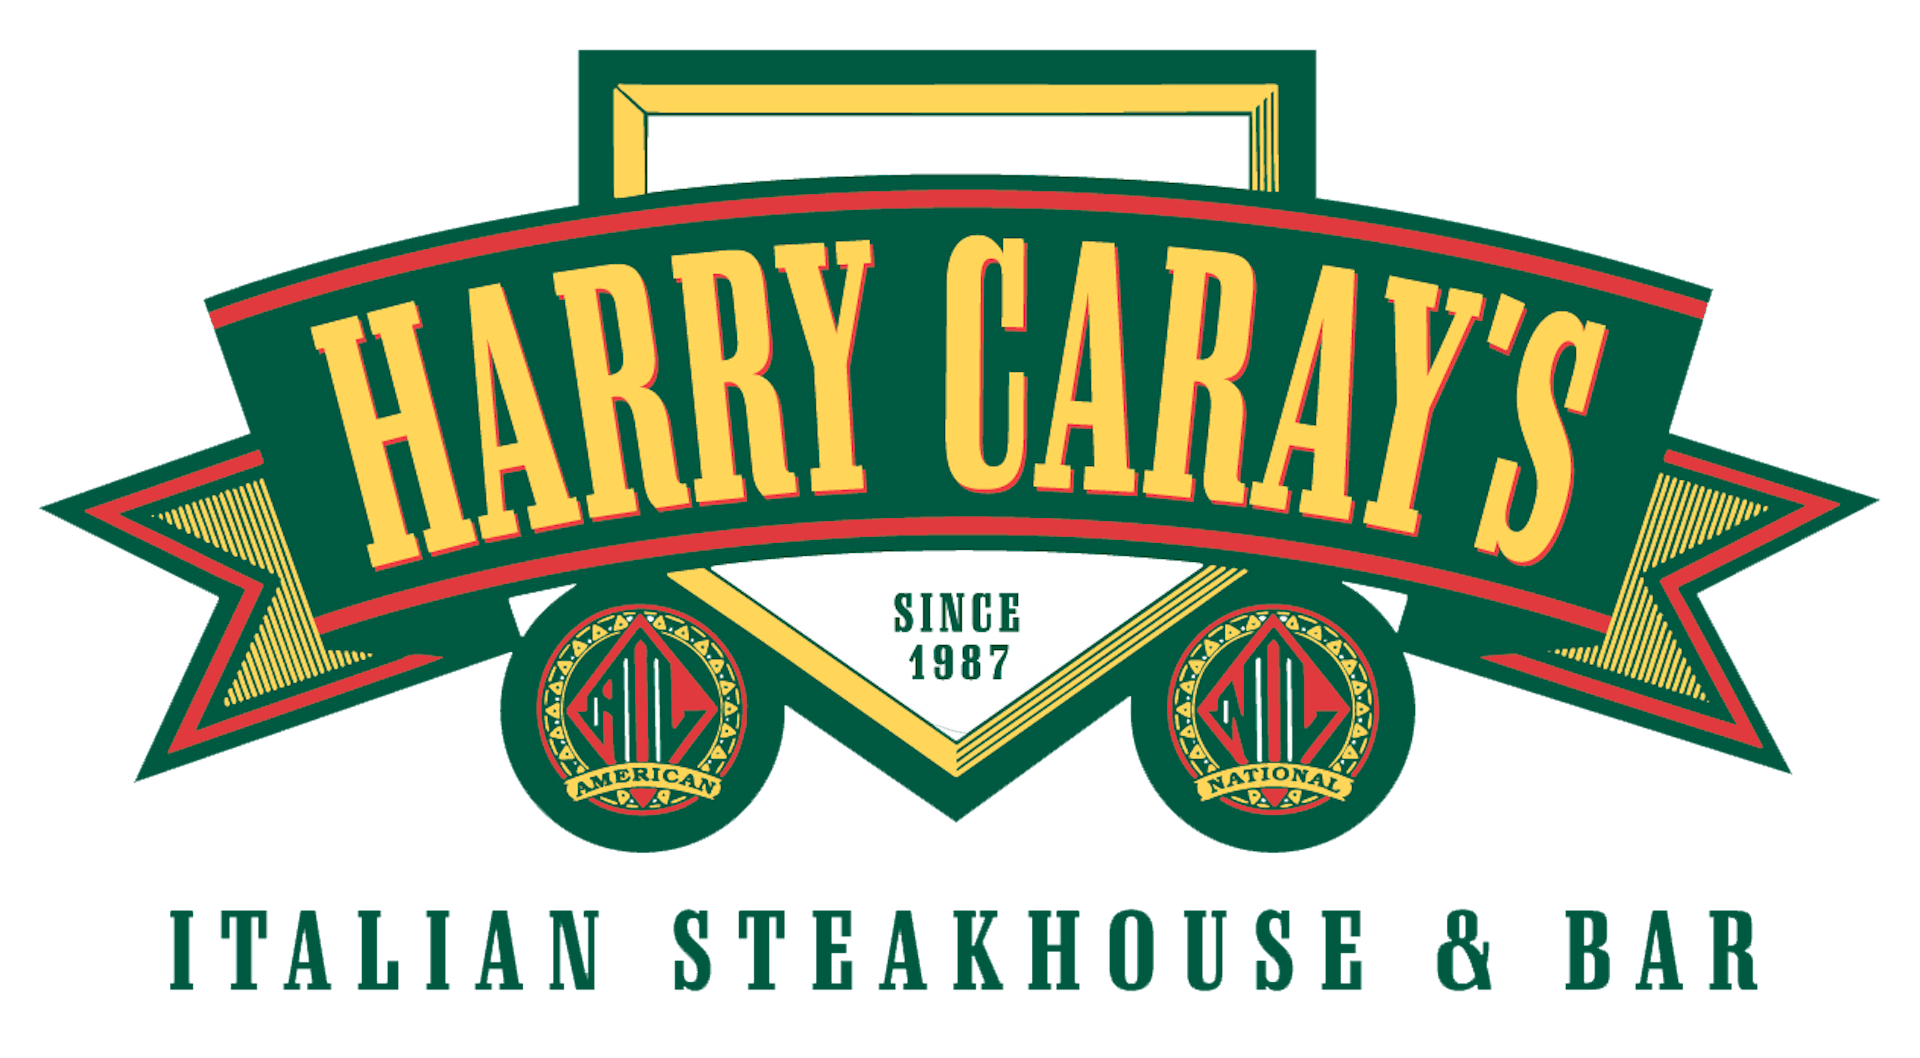 Merchandising at Harry Caray's Tavern - Picture of Harry Caray's